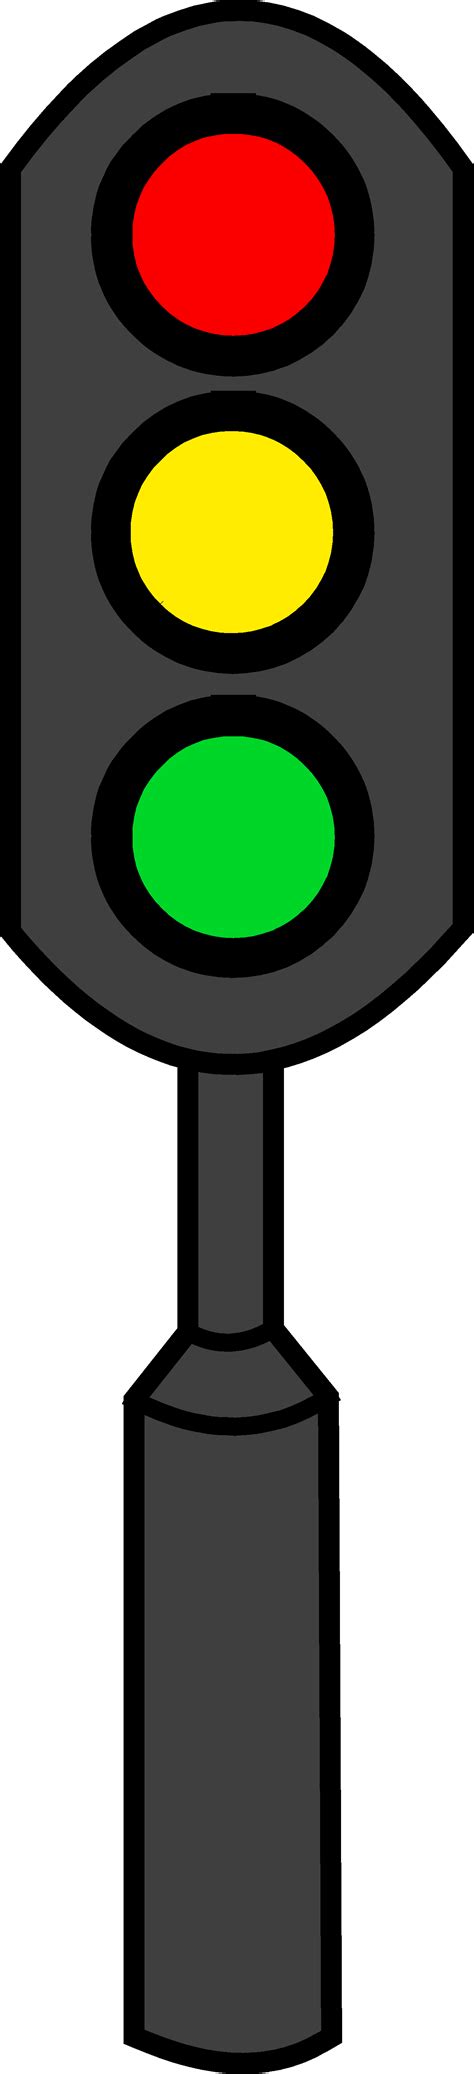 red traffic light image clipart